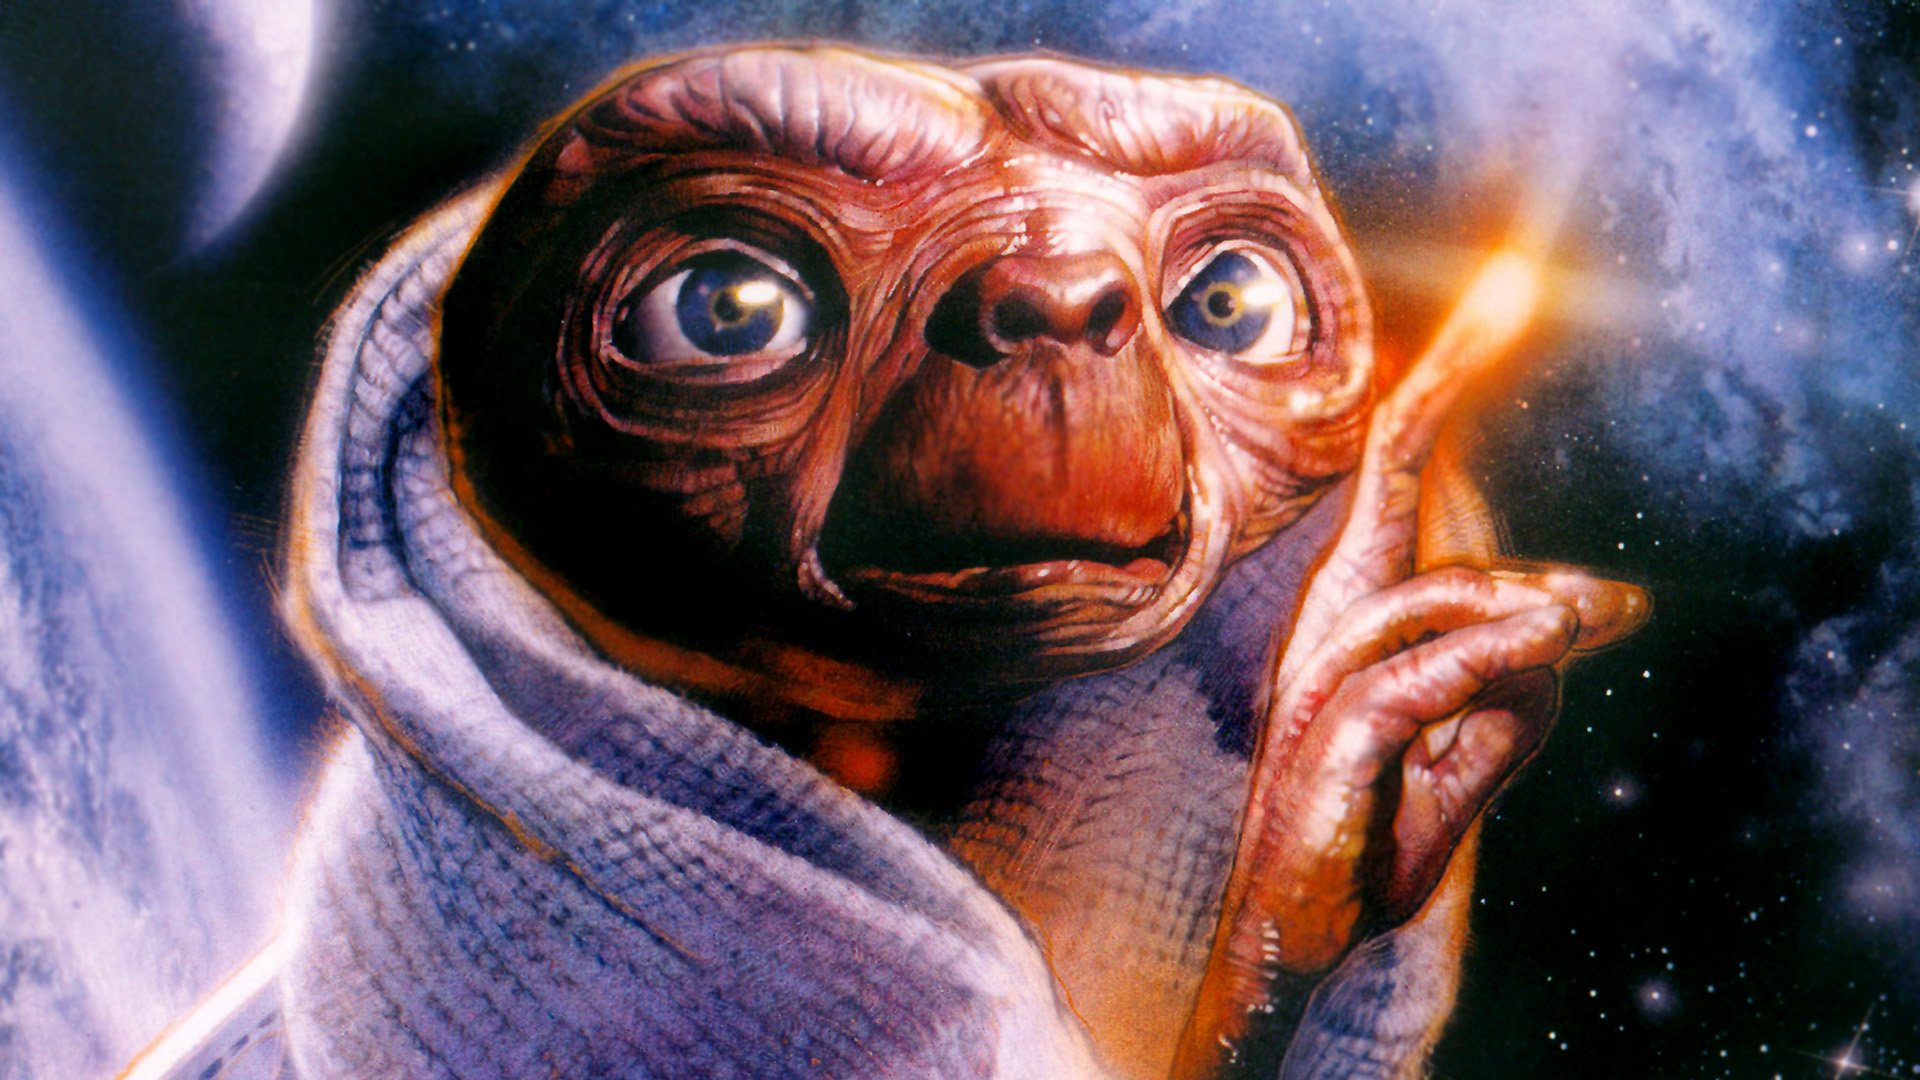 E.T. the Extra-Terrestrial download the new version for ipod